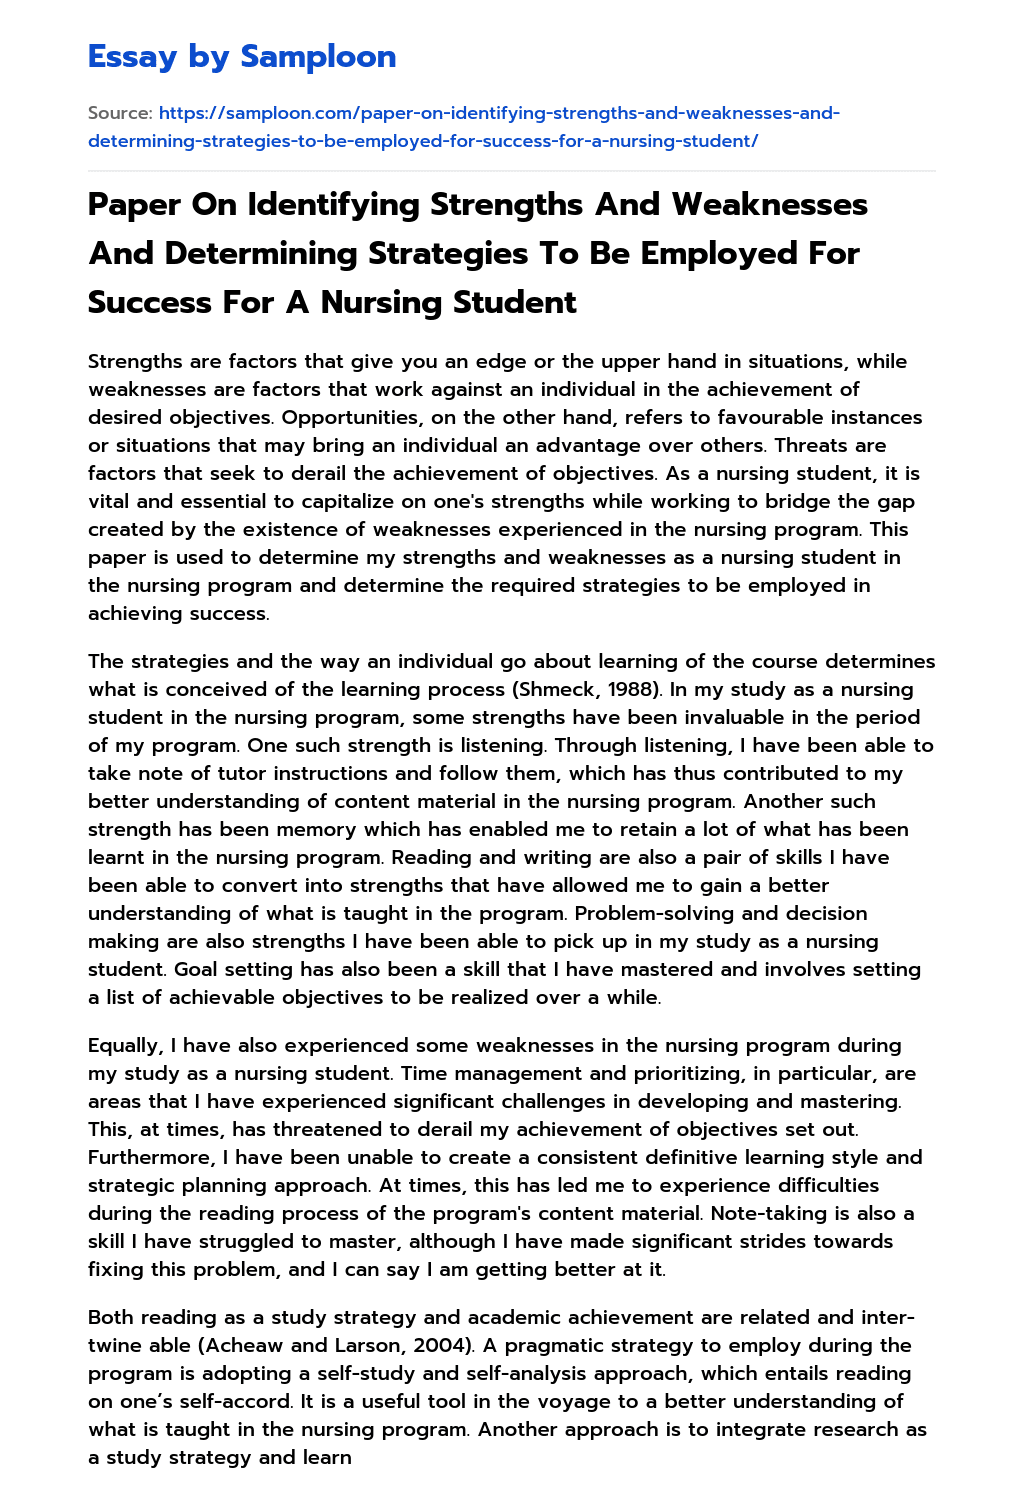 Paper On Identifying Strengths And Weaknesses And Determining Strategies To Be Employed For Success For A Nursing Student essay